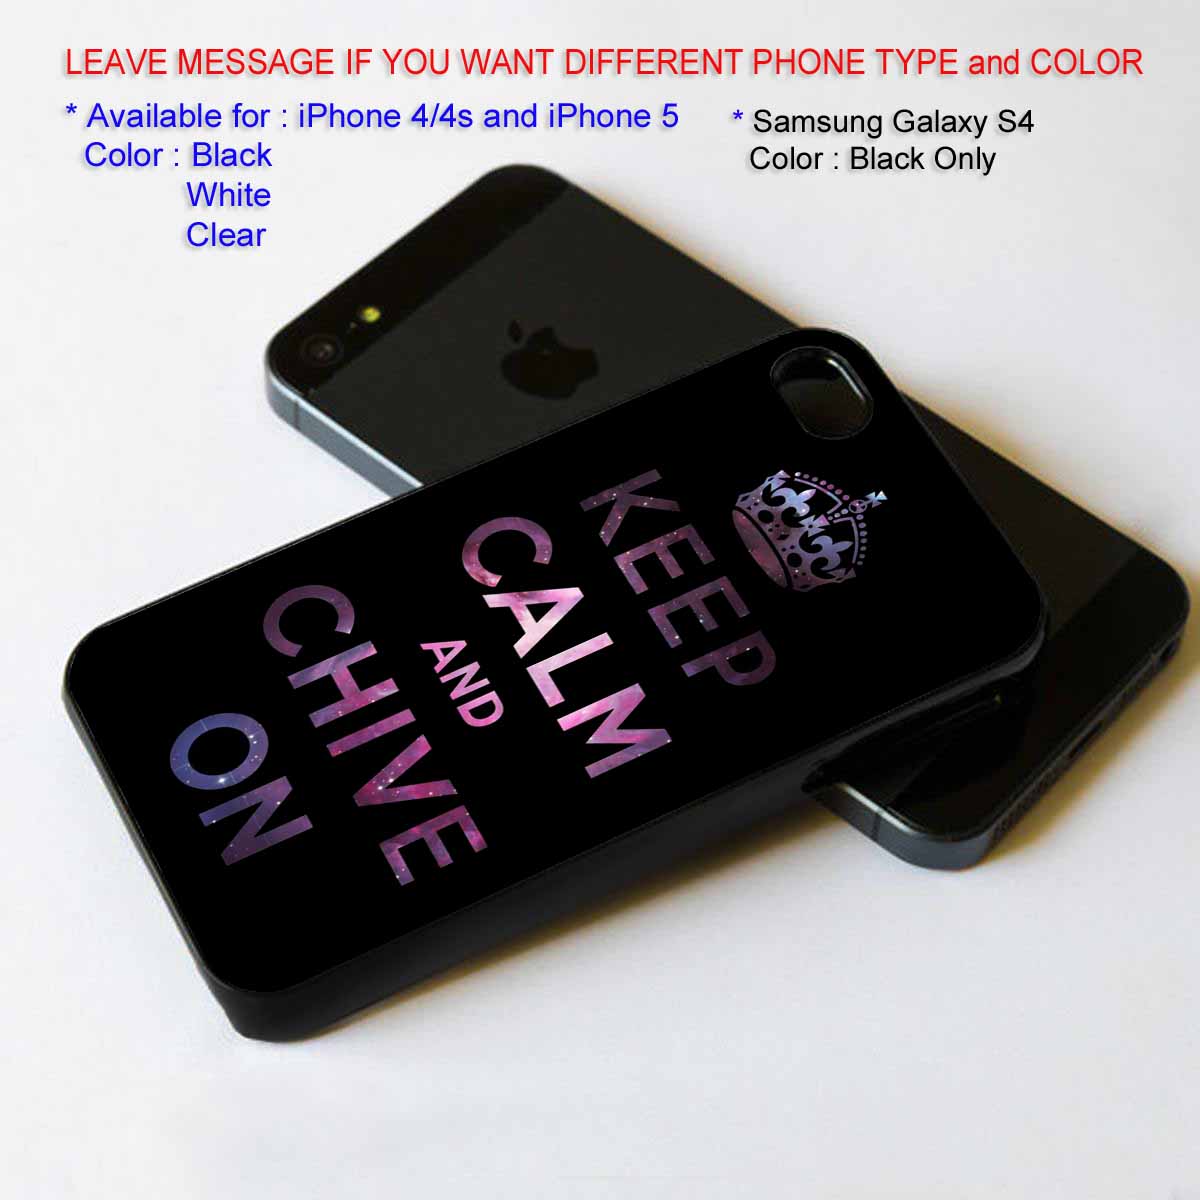 Keep Calm And Chive On, Pink Background Iphone 5 Black Case